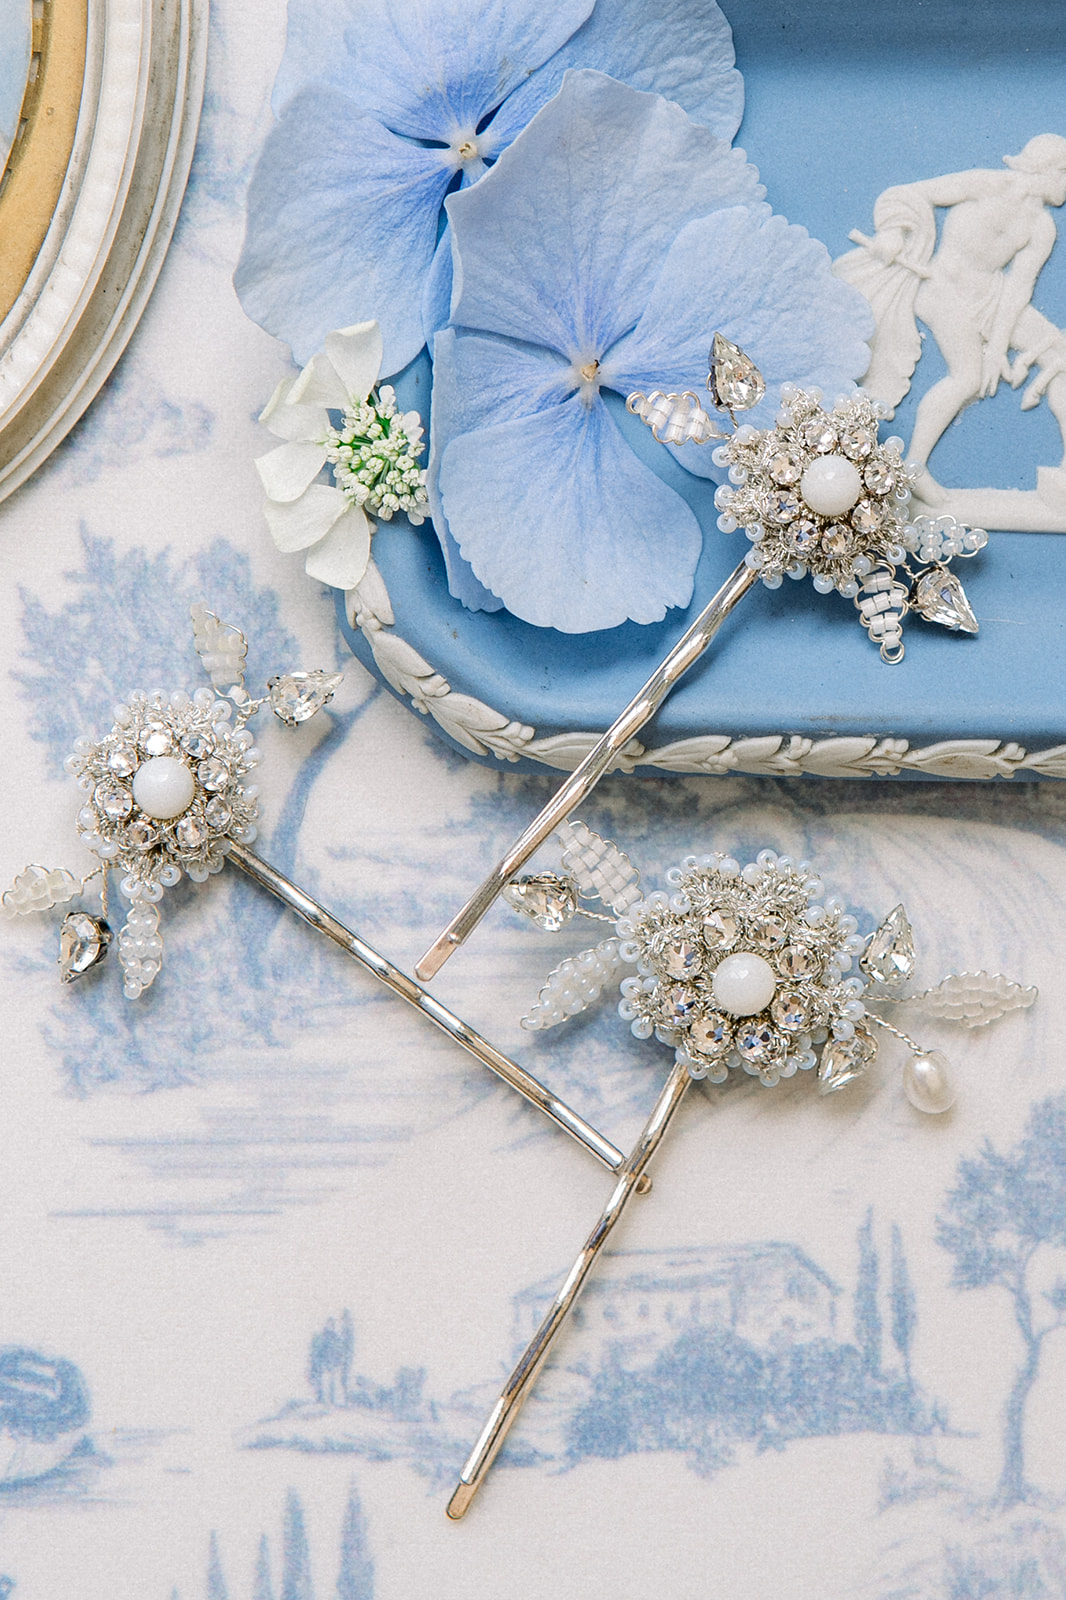 Elegant flat lay of wedding accessories with a destination wedding theme, featuring elements from Ireland's local artisa